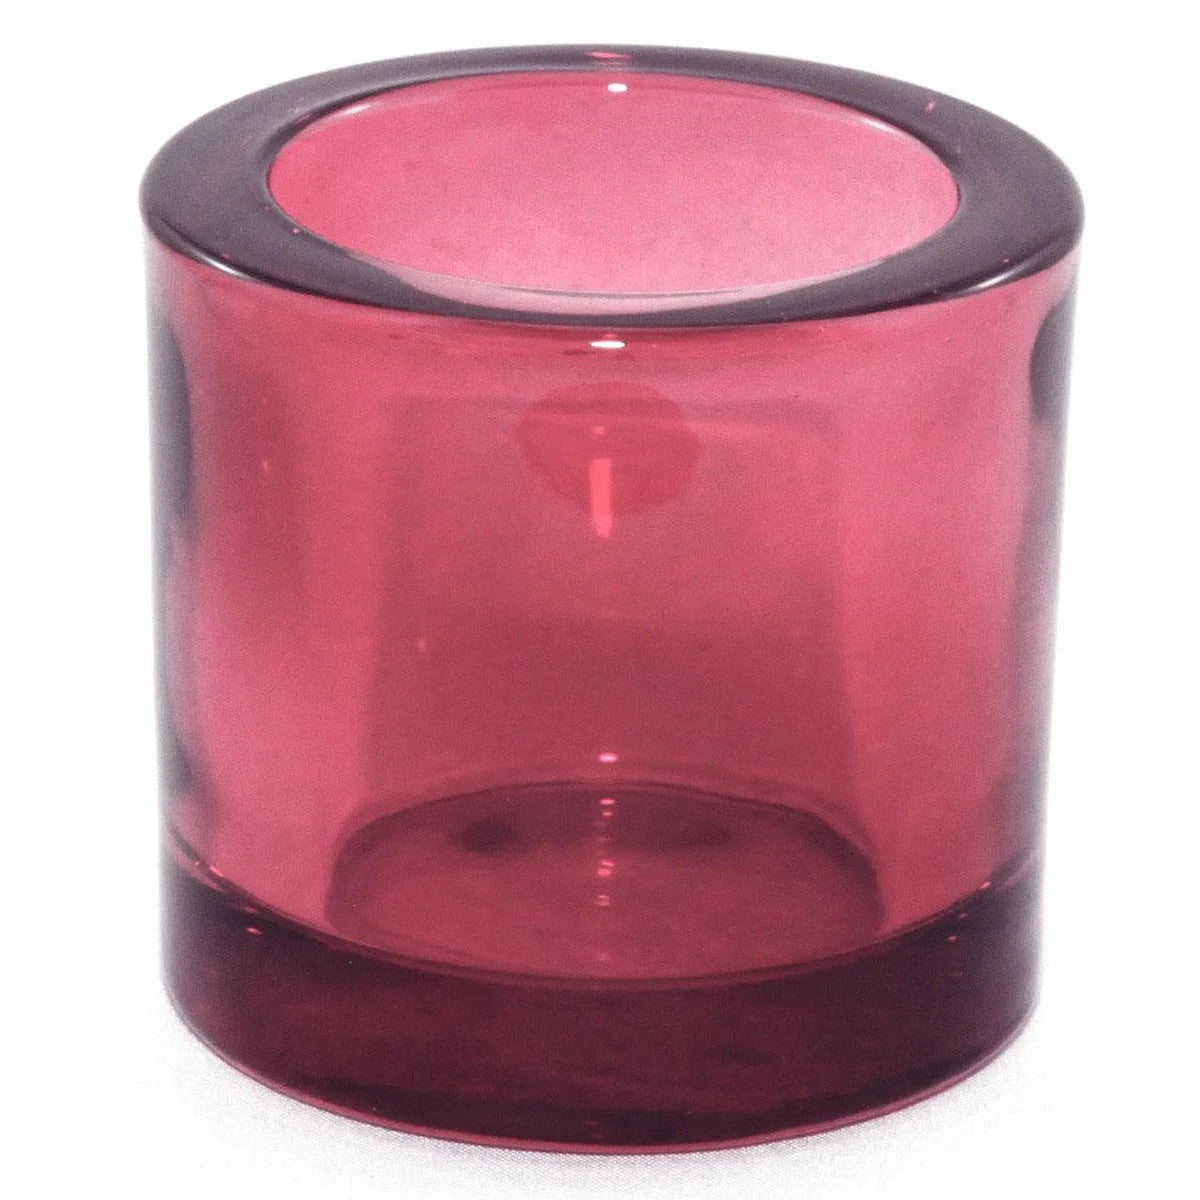 CANDLE HOLDER, HEAVY GLASS - BORDEAUX